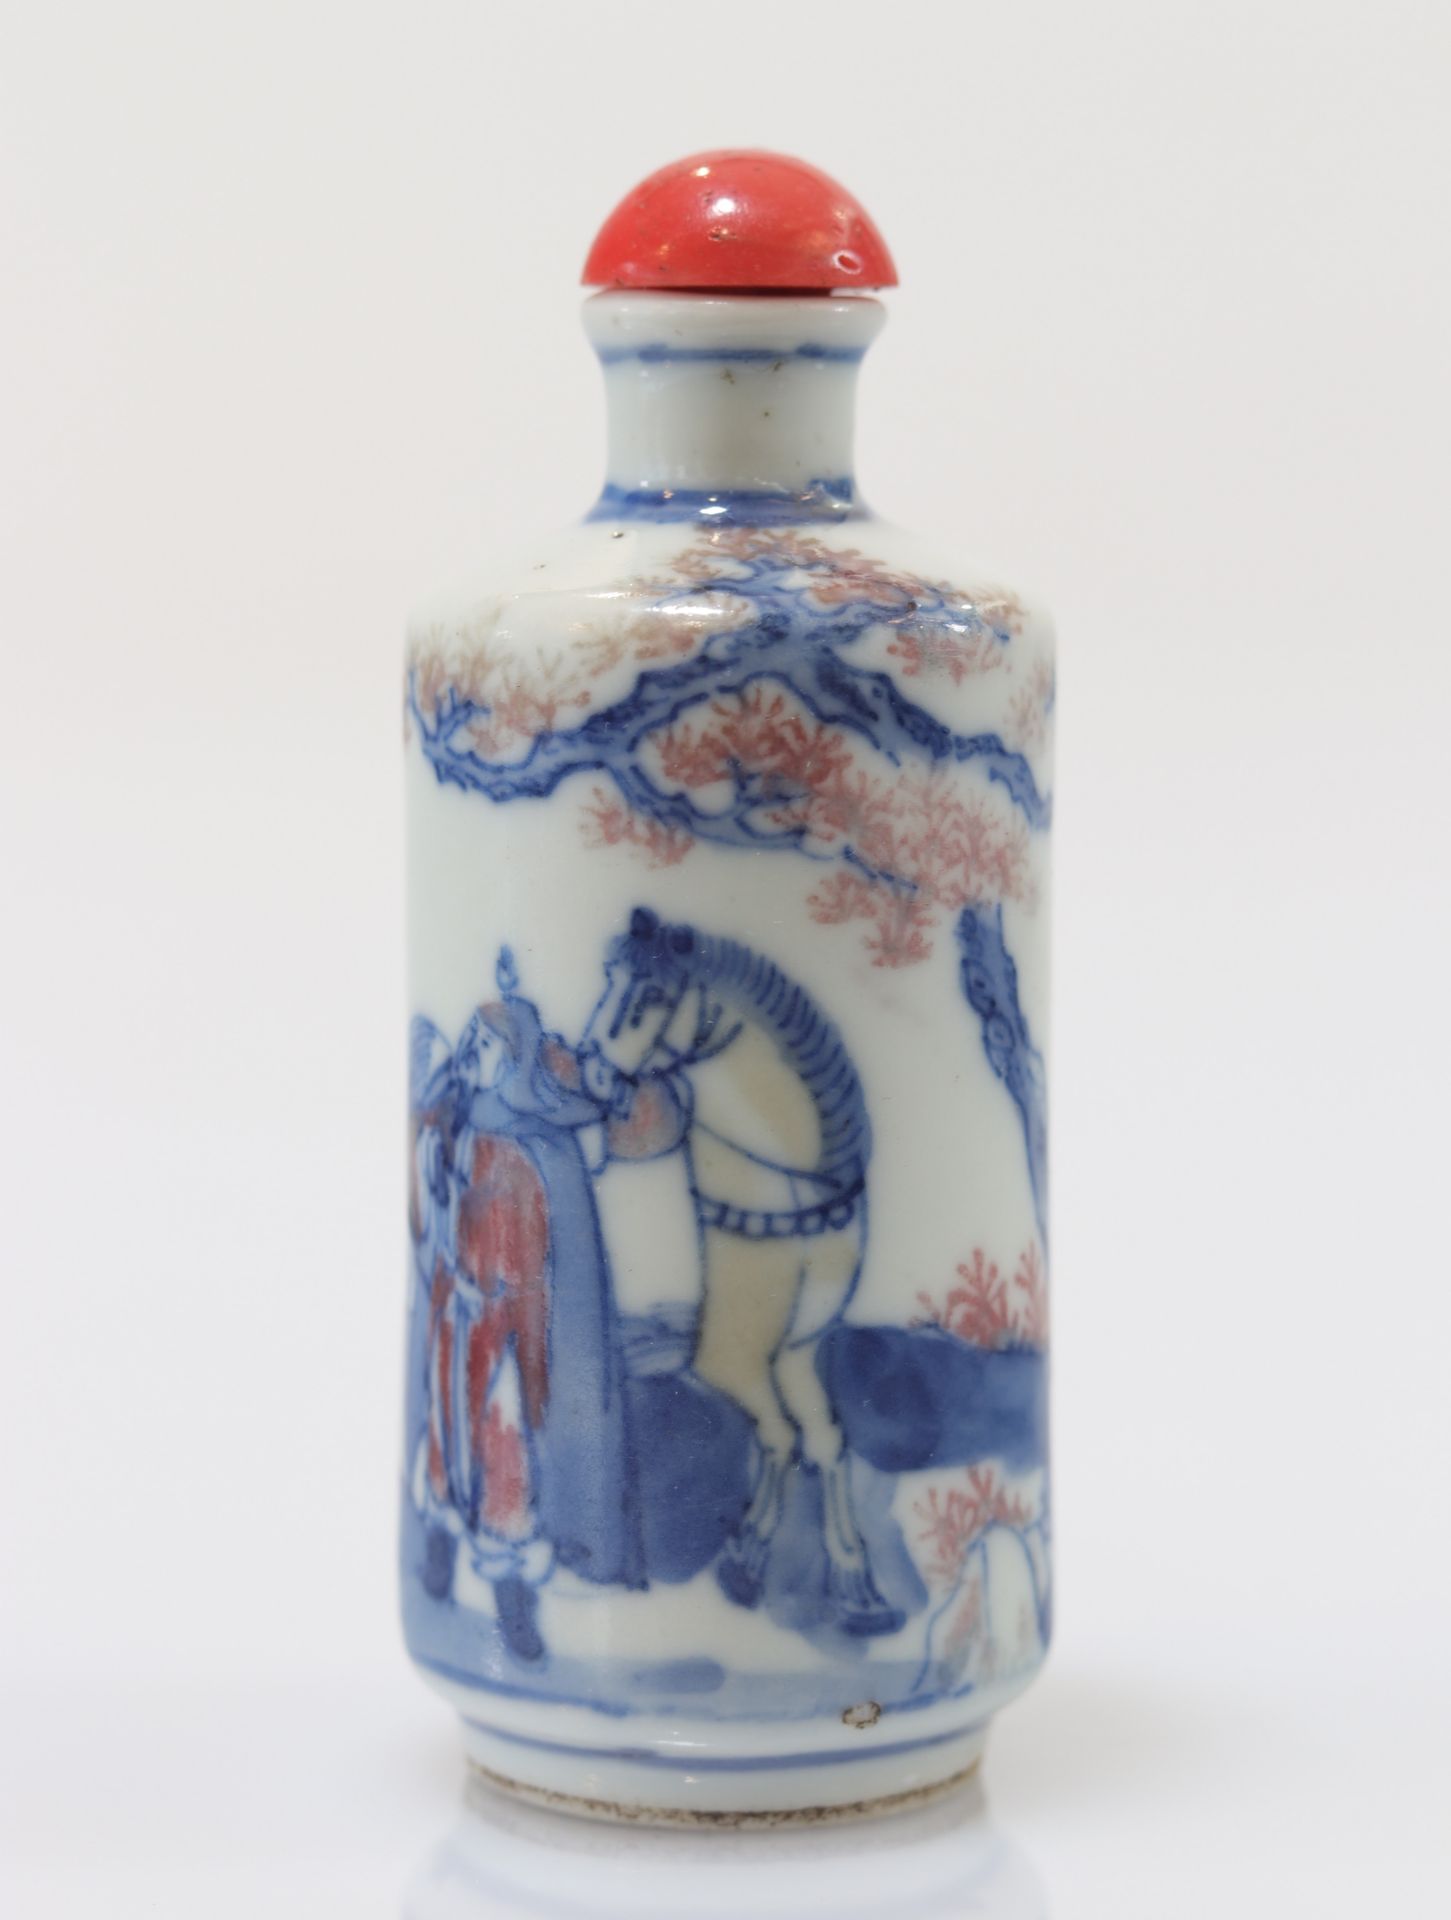 White blue and iron red porcelain snuff bottle decorated with Qing period characters - Image 7 of 8